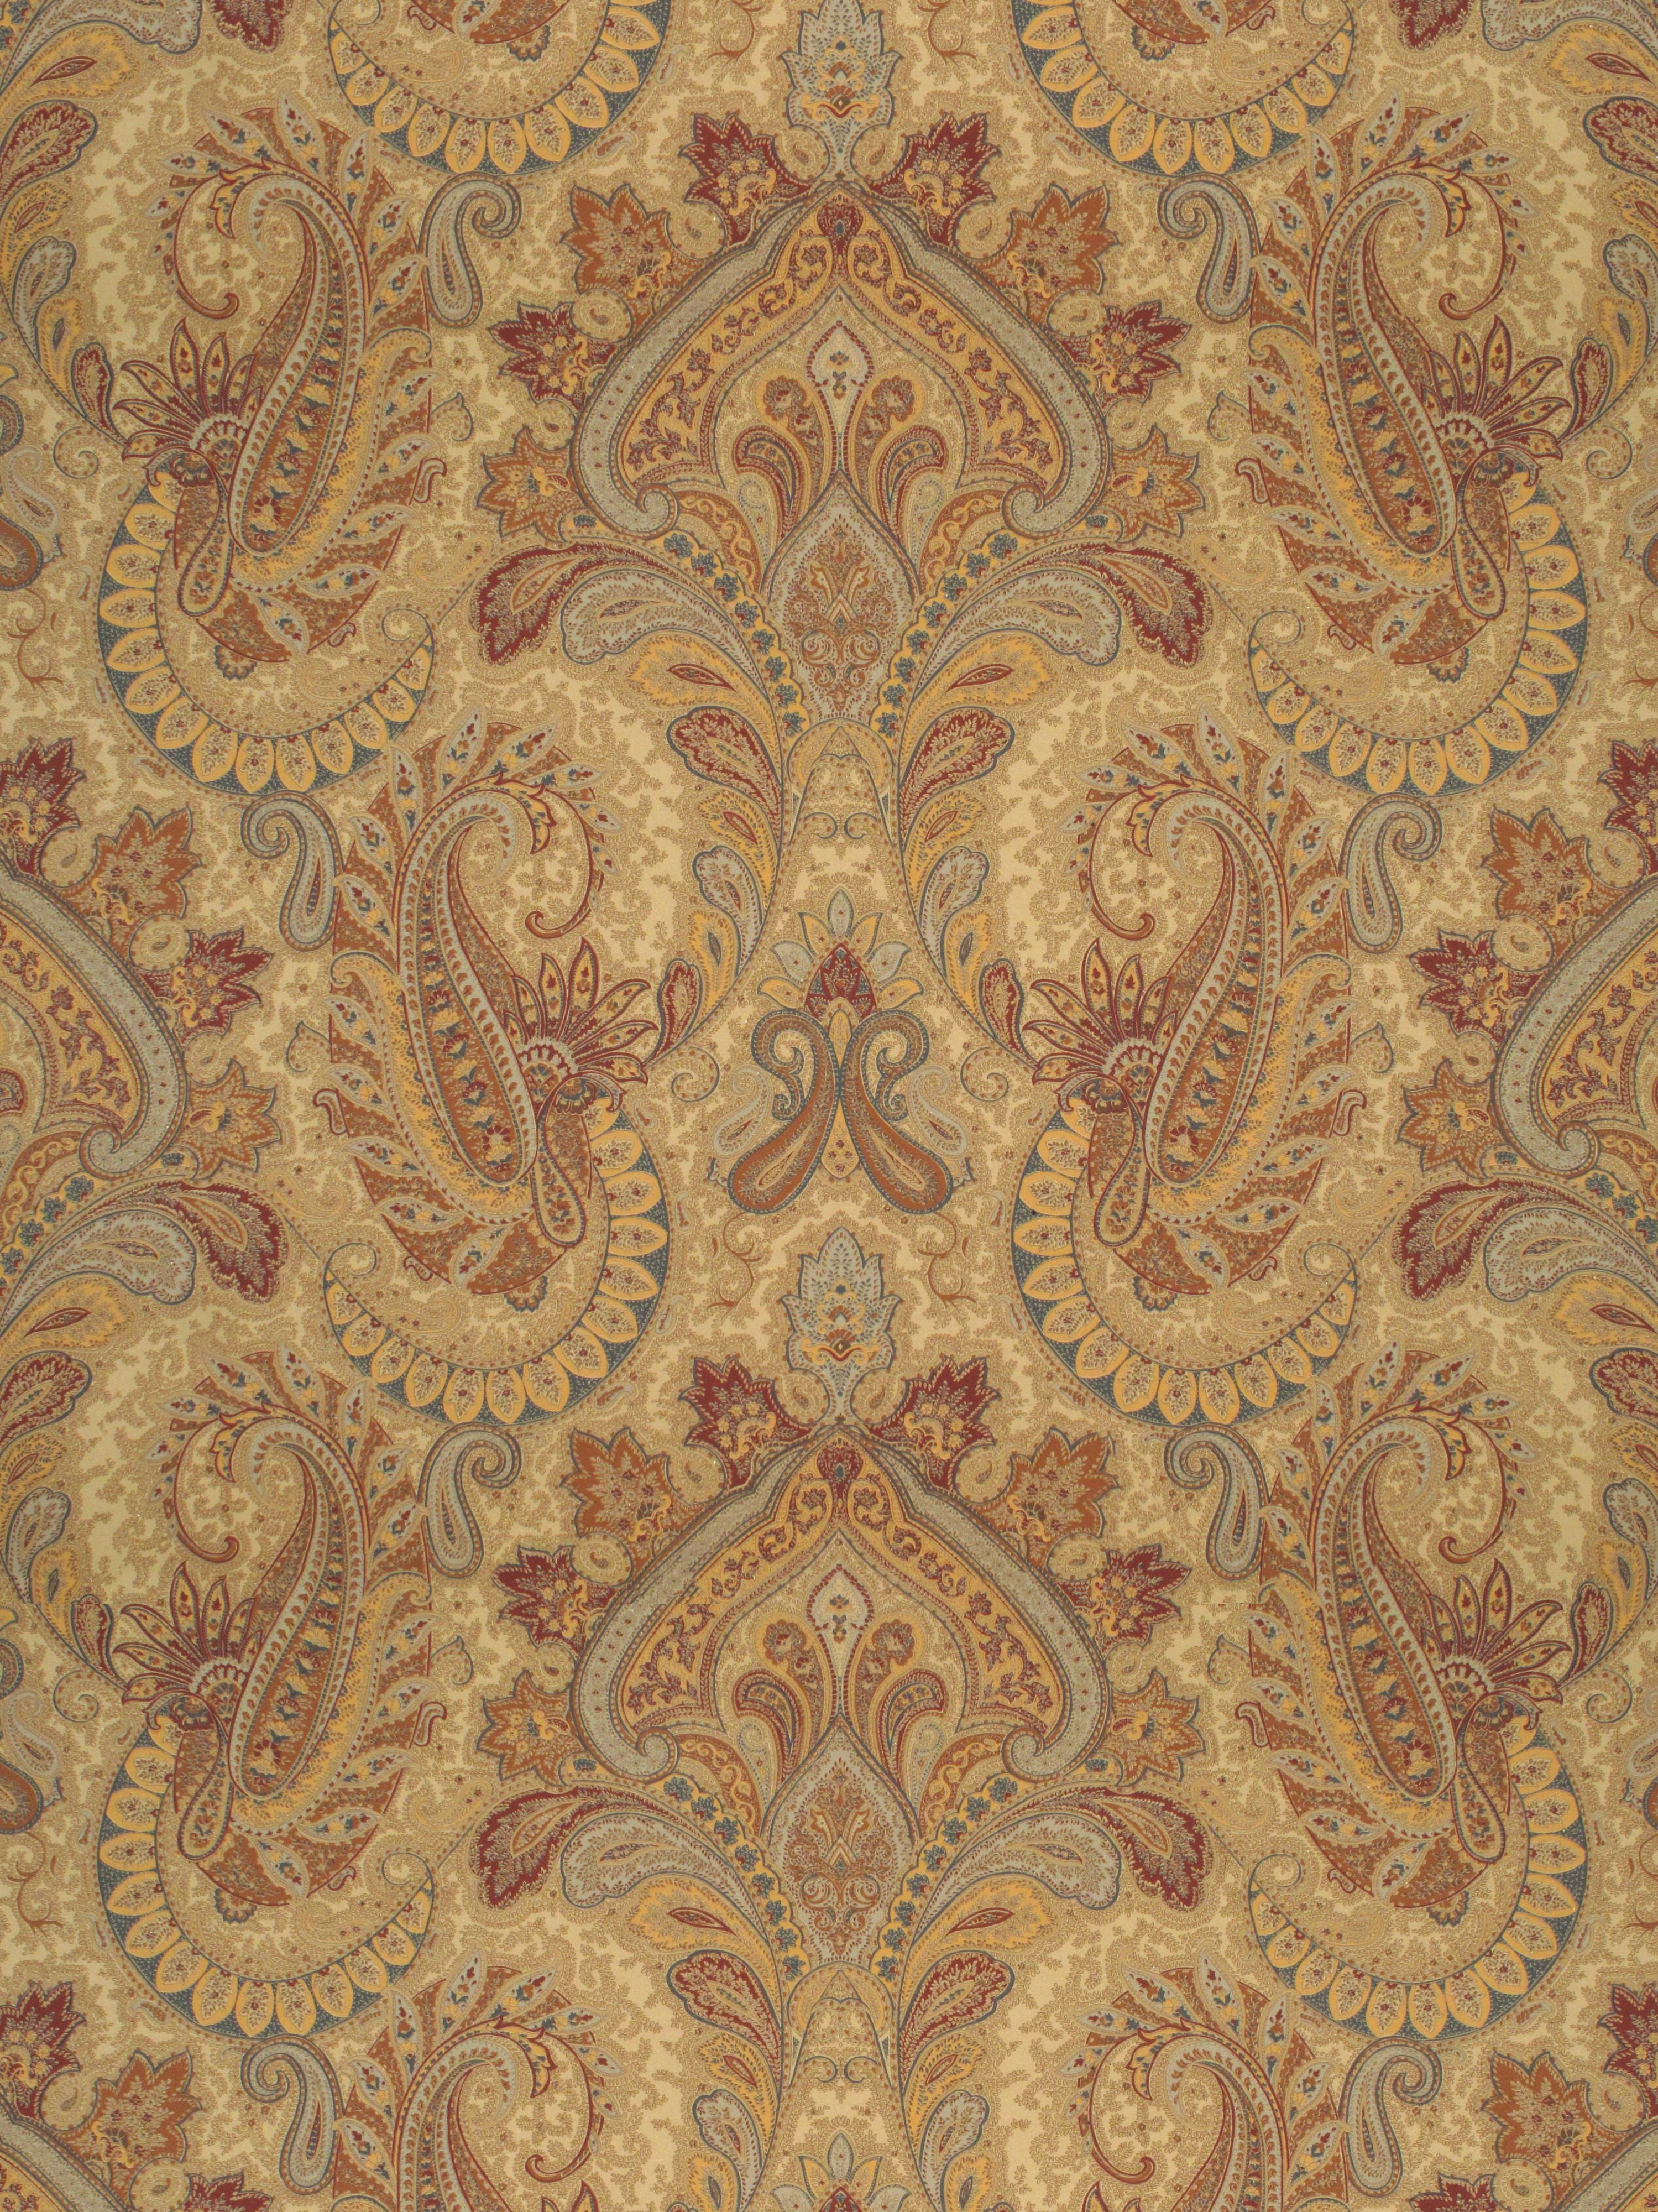 Eugenie fabric in havana color - pattern number CQ 00041221 - by Scalamandre in the Old World Weavers collection